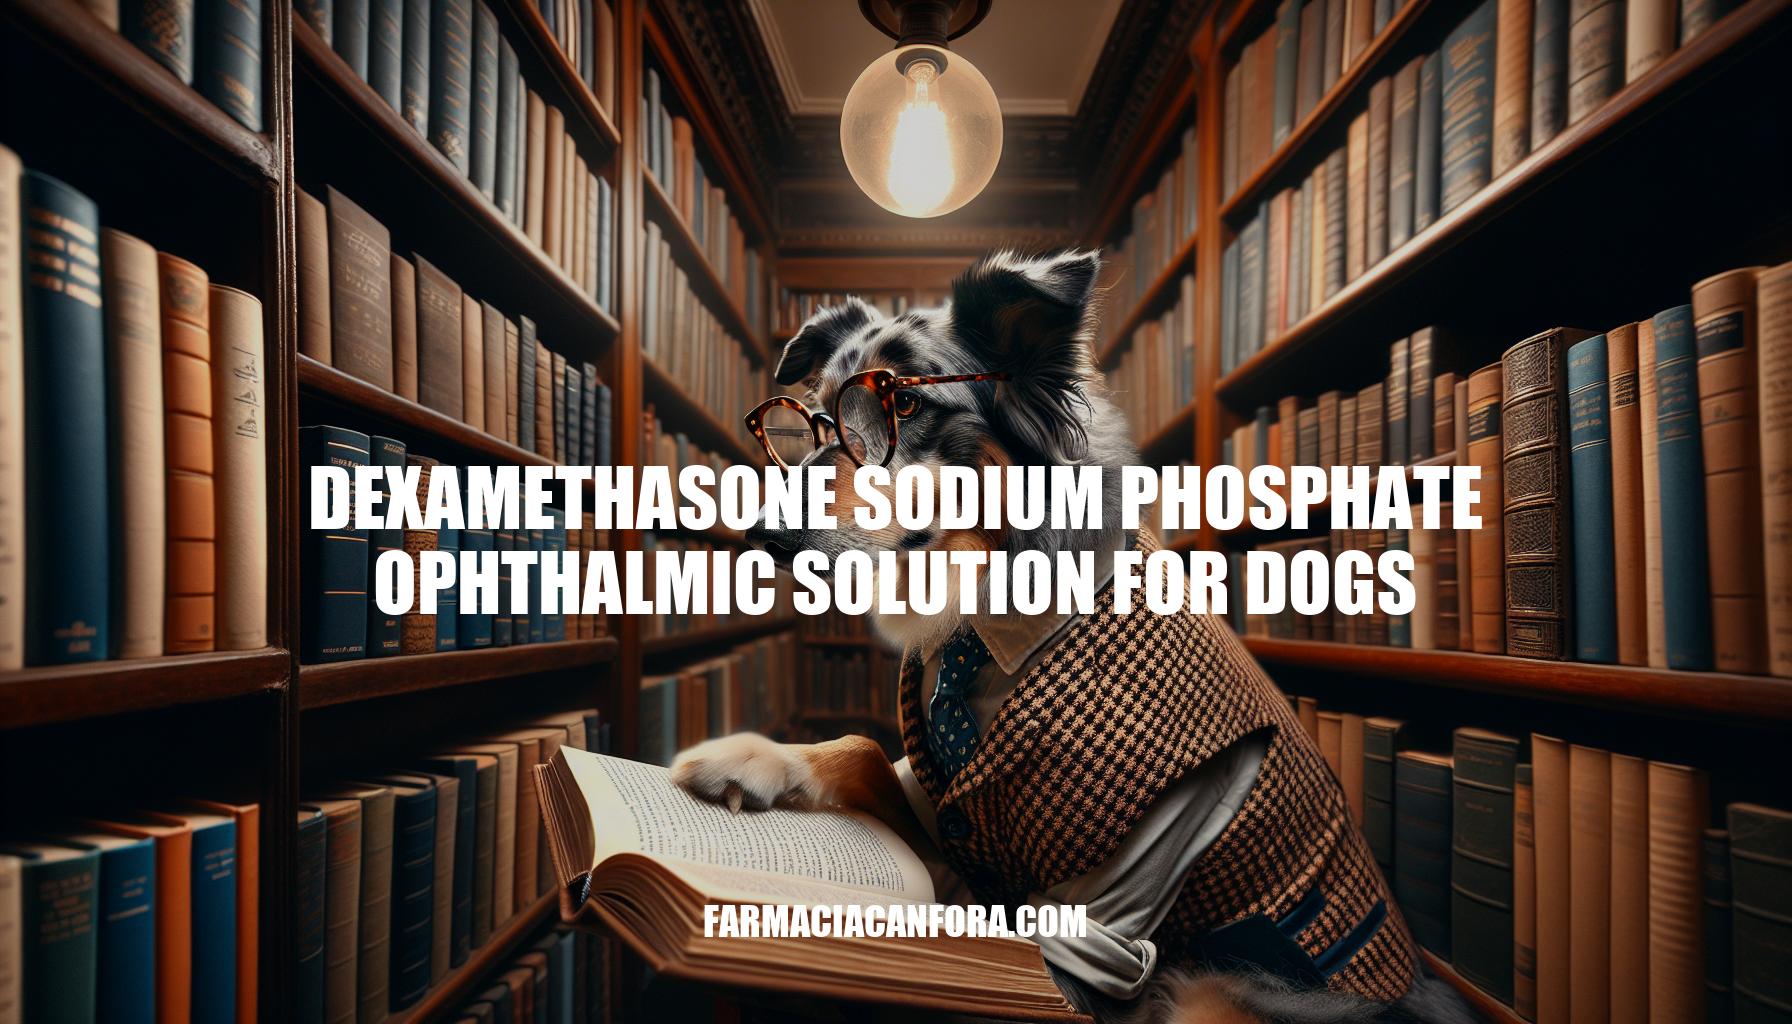 Dexamethasone Sodium Phosphate Ophthalmic Solution for Dogs: A Comprehensive Guide